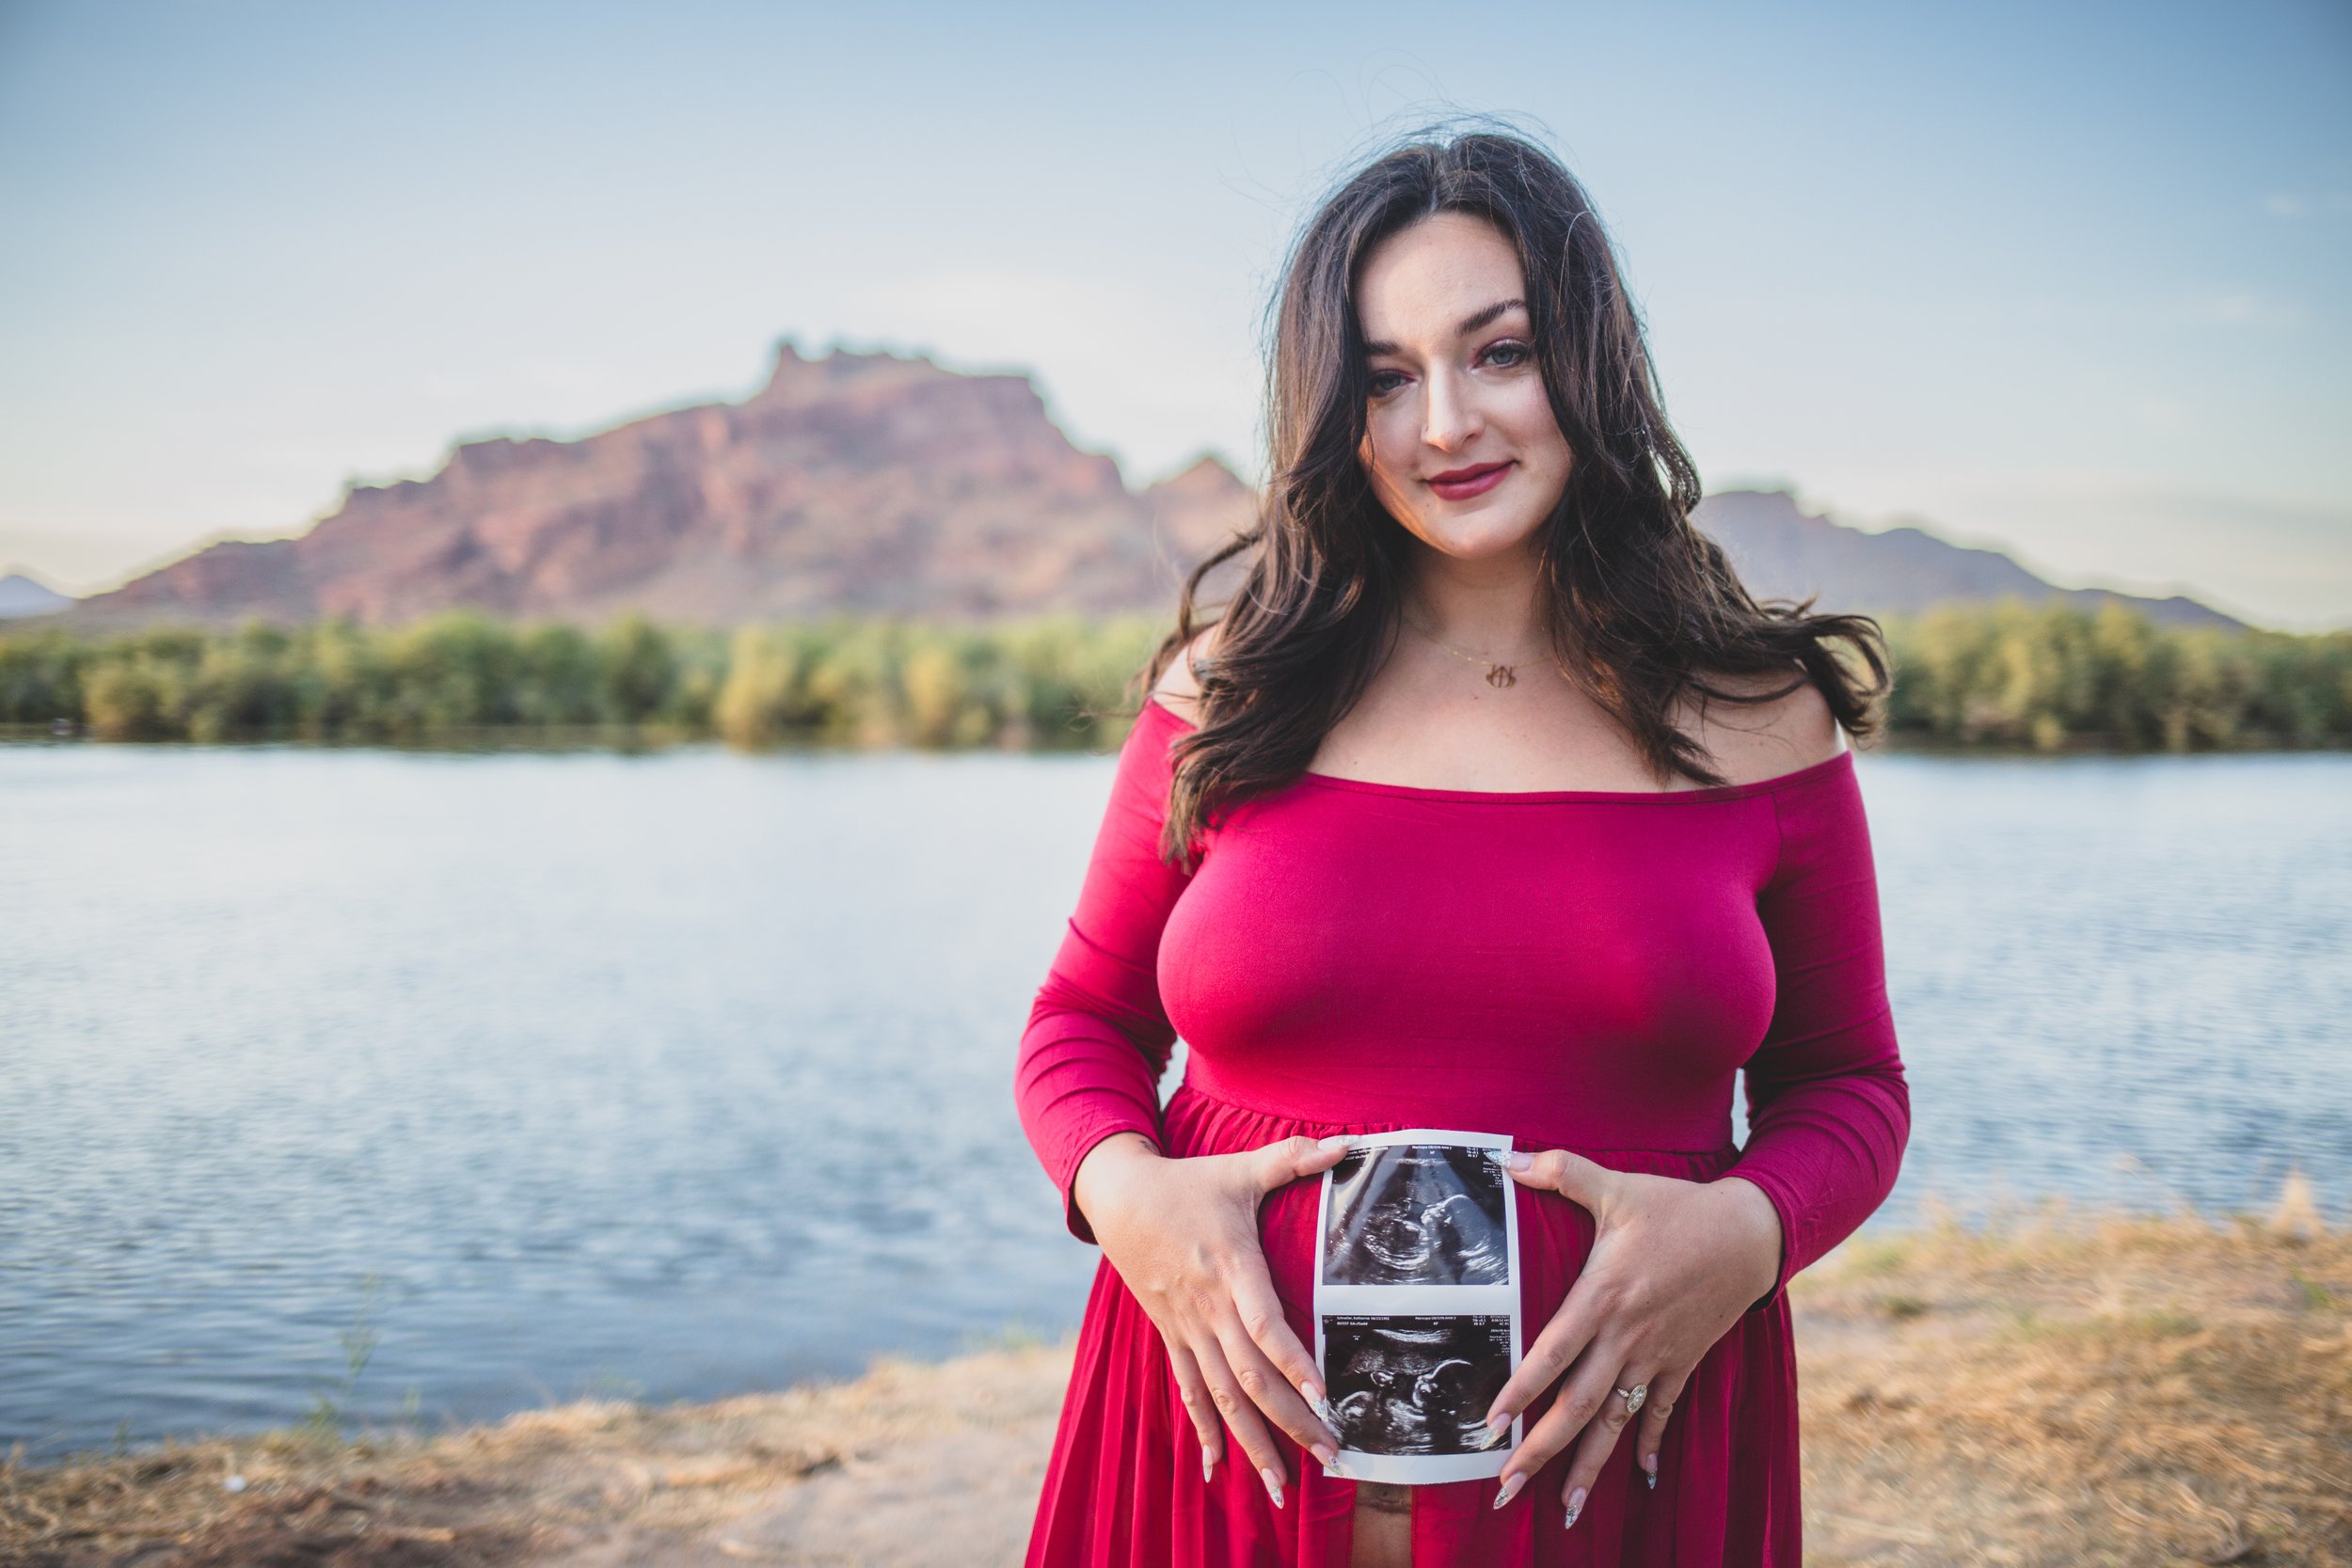 Expecting mother-to-be poses in a red dress with ultrasound pictures for maternity photos in front of the Salt River and mountain by timeless Arizona maternity photographer; Jennifer Lind Schutsky.